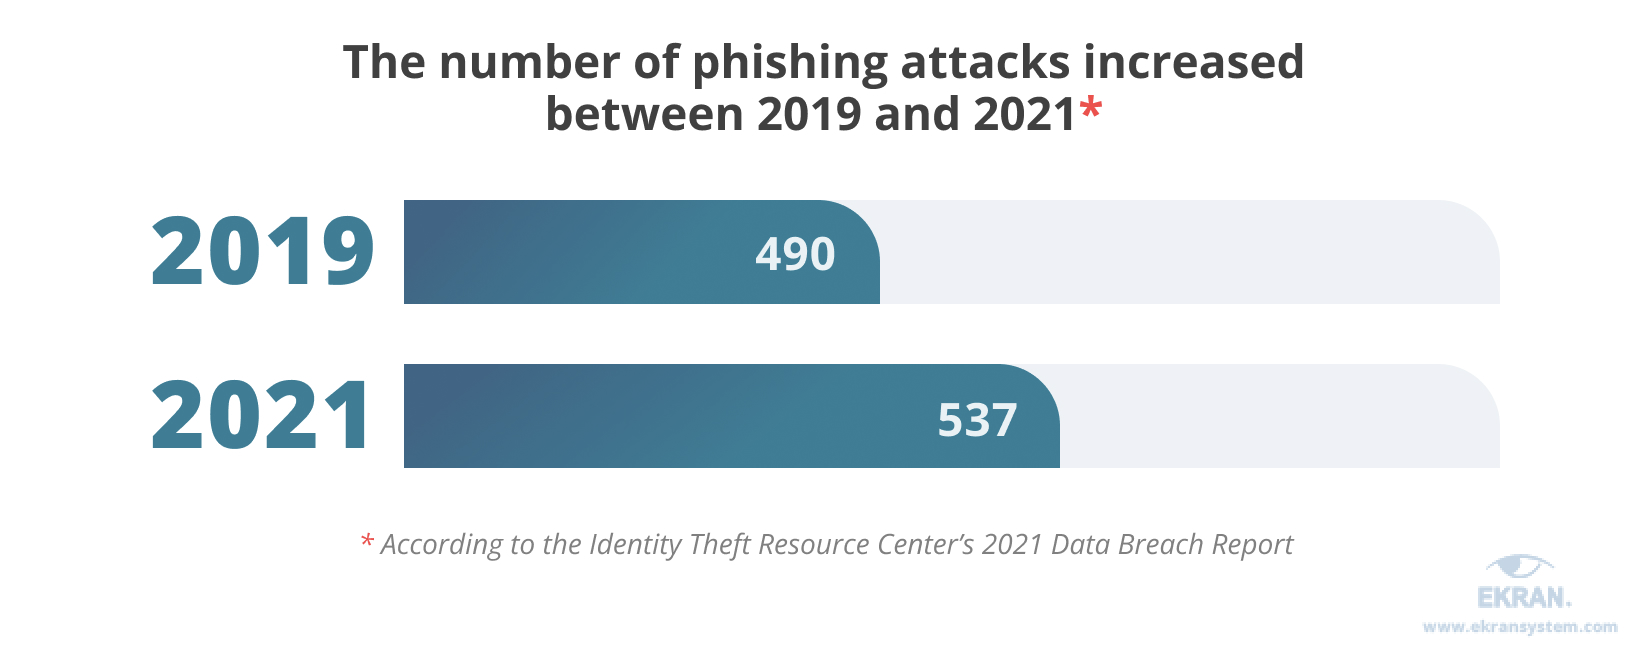 The number of phishing attacks increased